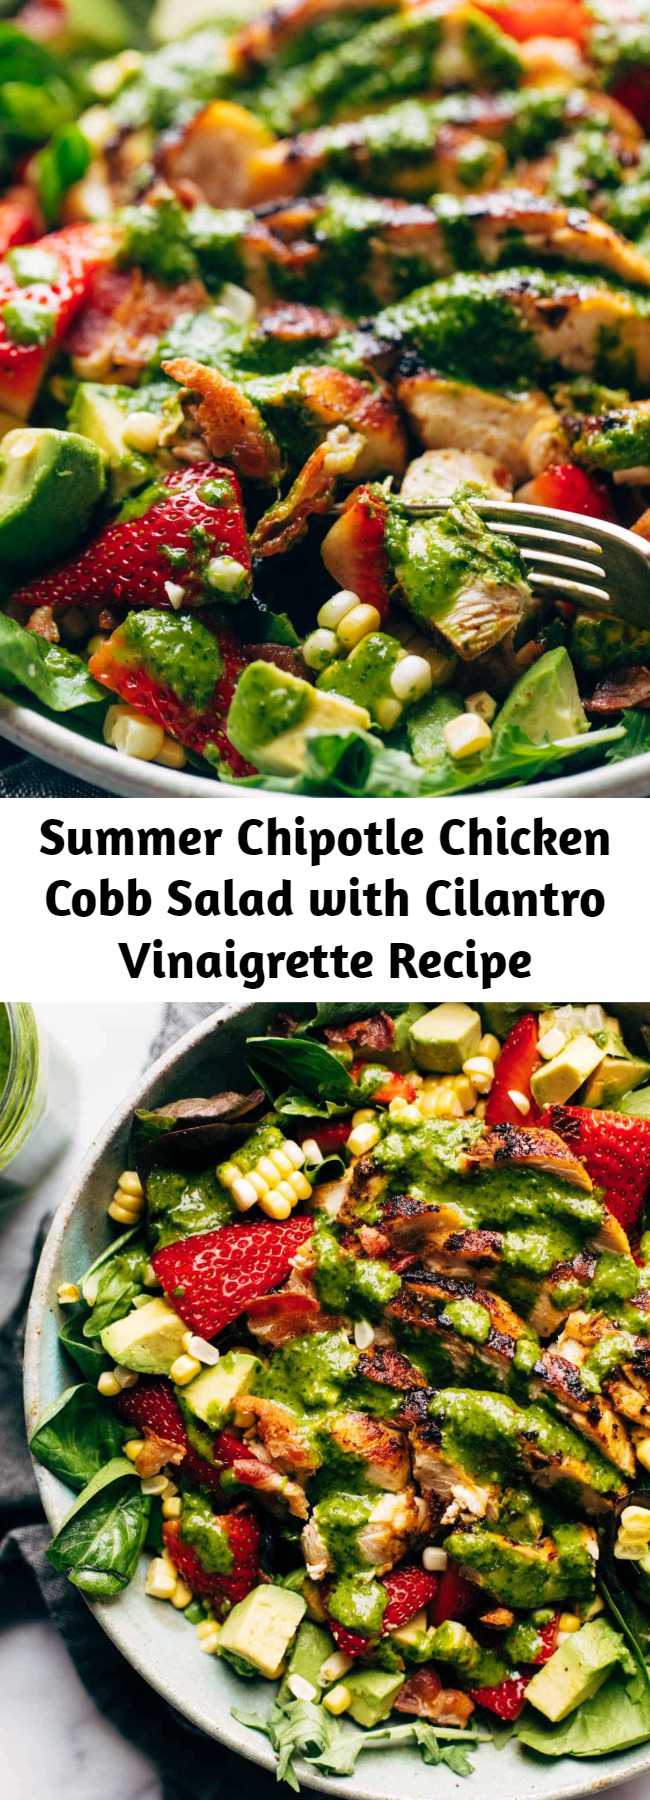 Summer Chipotle Chicken Cobb Salad with Cilantro Vinaigrette Recipe - This juicy salad tastes like summer! With chipotle chicken, sweet corn, avocado, cilantro vinaigrette, bacon crumbles, and fresh strawberries for a pop of sweetness. #salad #summer #cobbsalad #chipotlechicken #cleaneating